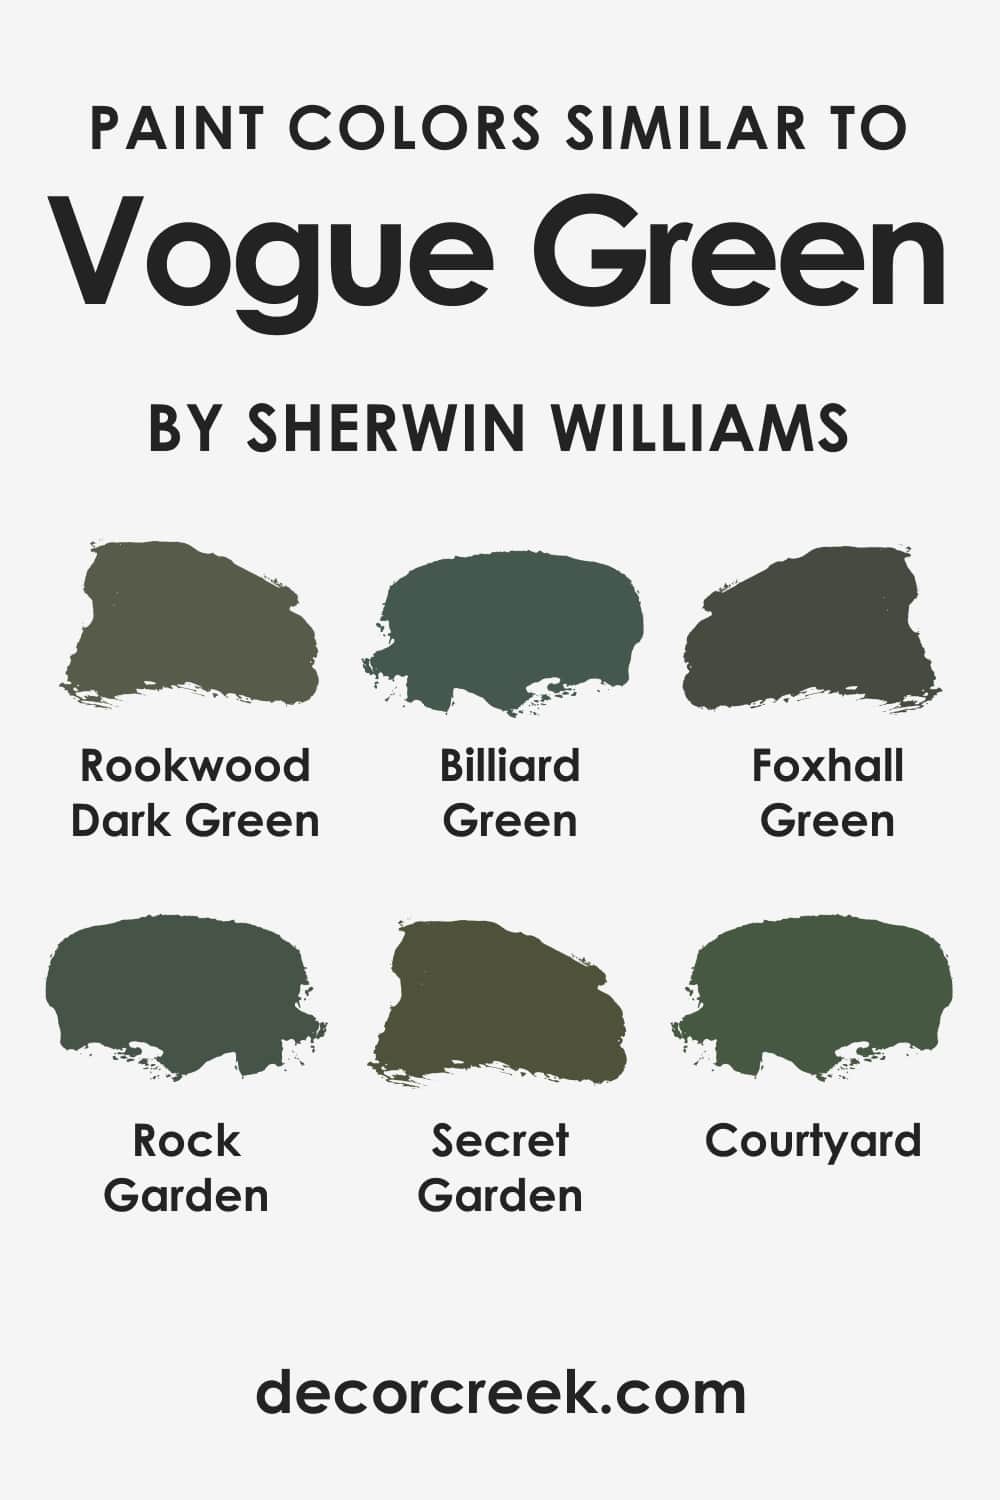 Paint Colors Similar to Vogue Green